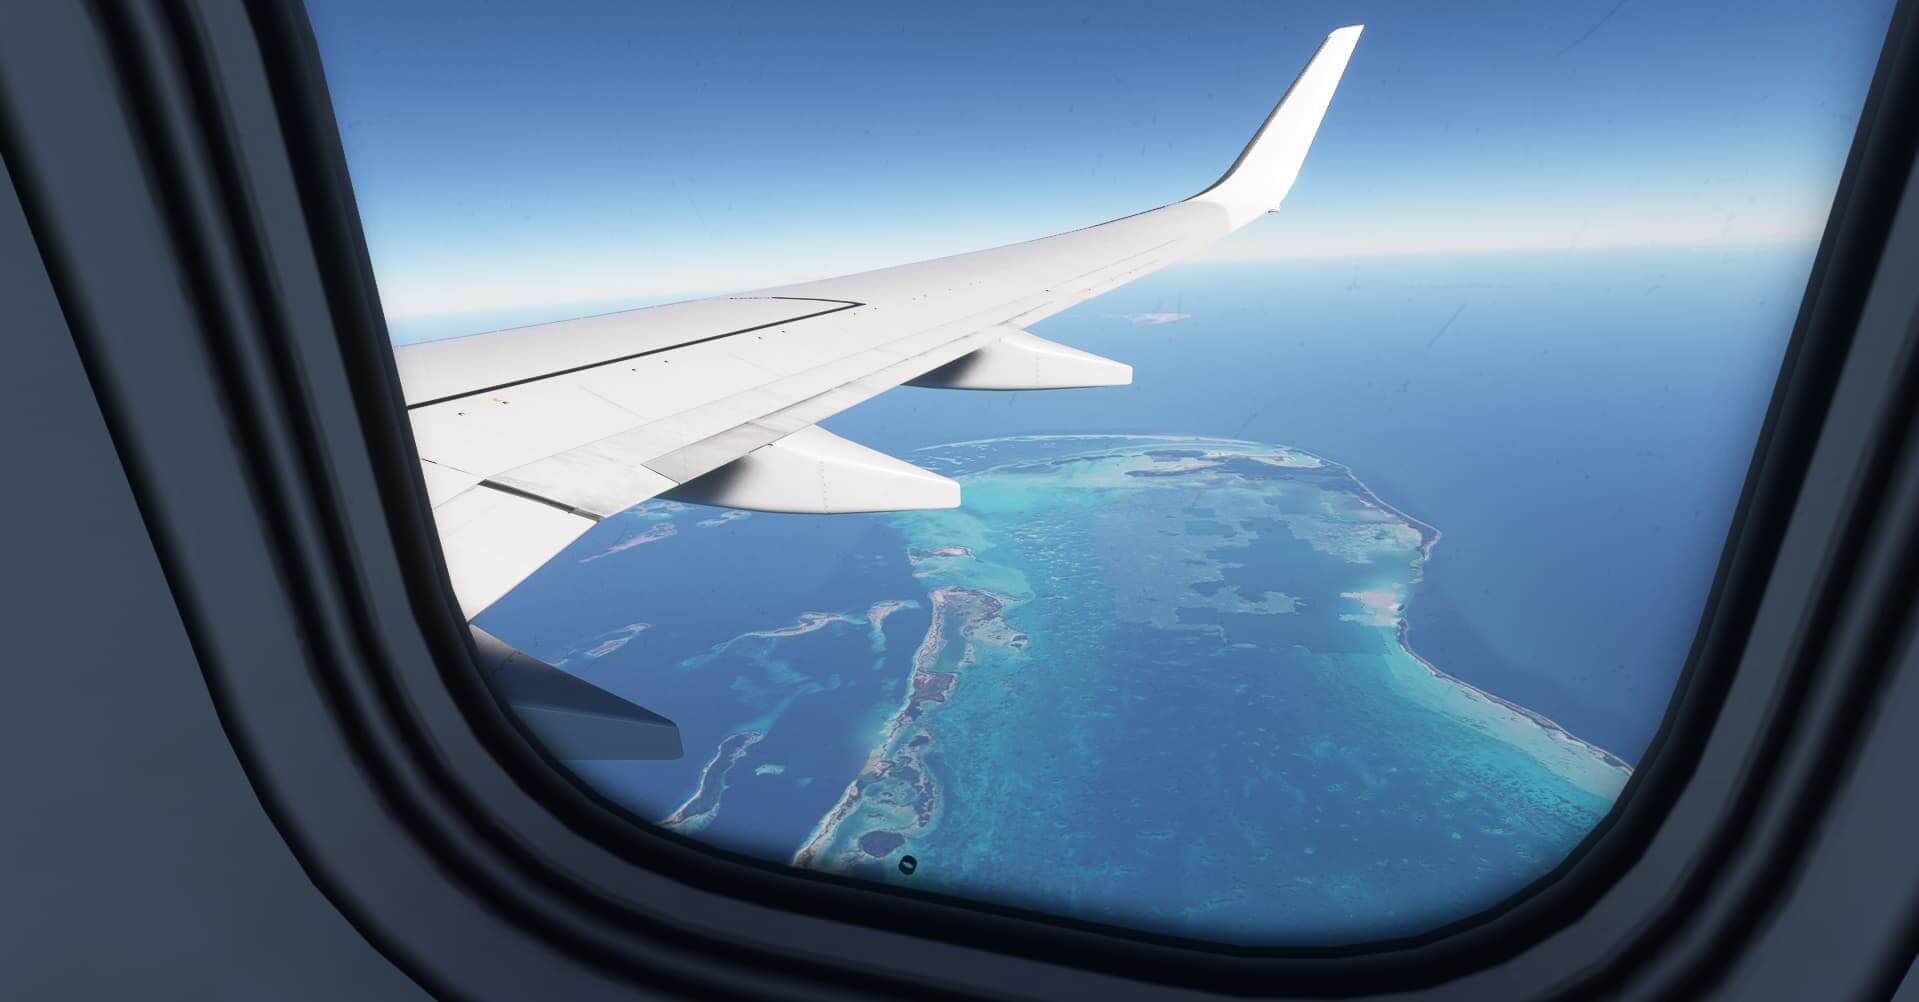 The perspective of a passenger looking out of a window of a Boeing 737 passenger airline. Outside the window the wing of the aircraft is in view, with coral reefs below.